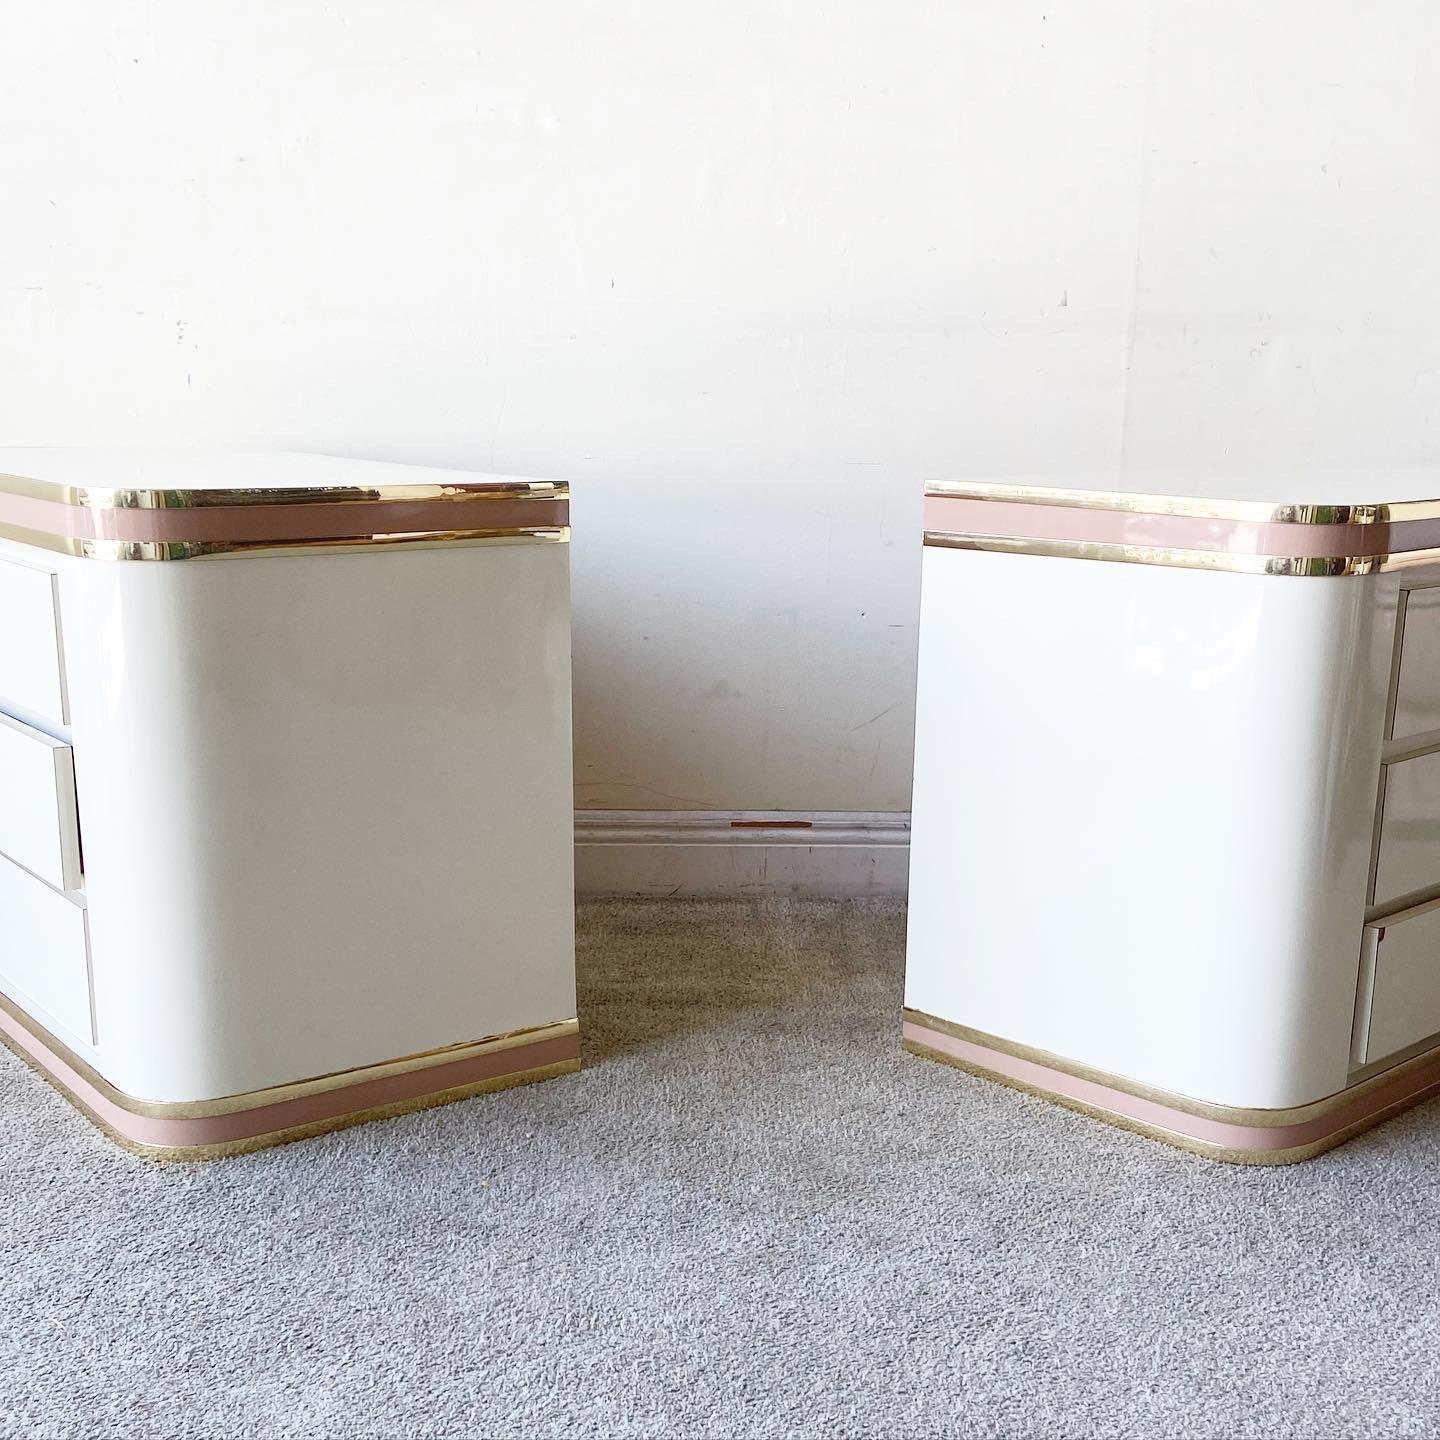 Late 20th Century Postmodern Ivory Lacquer Laminate Nightstands with Gold and Pink Trim - a Pair